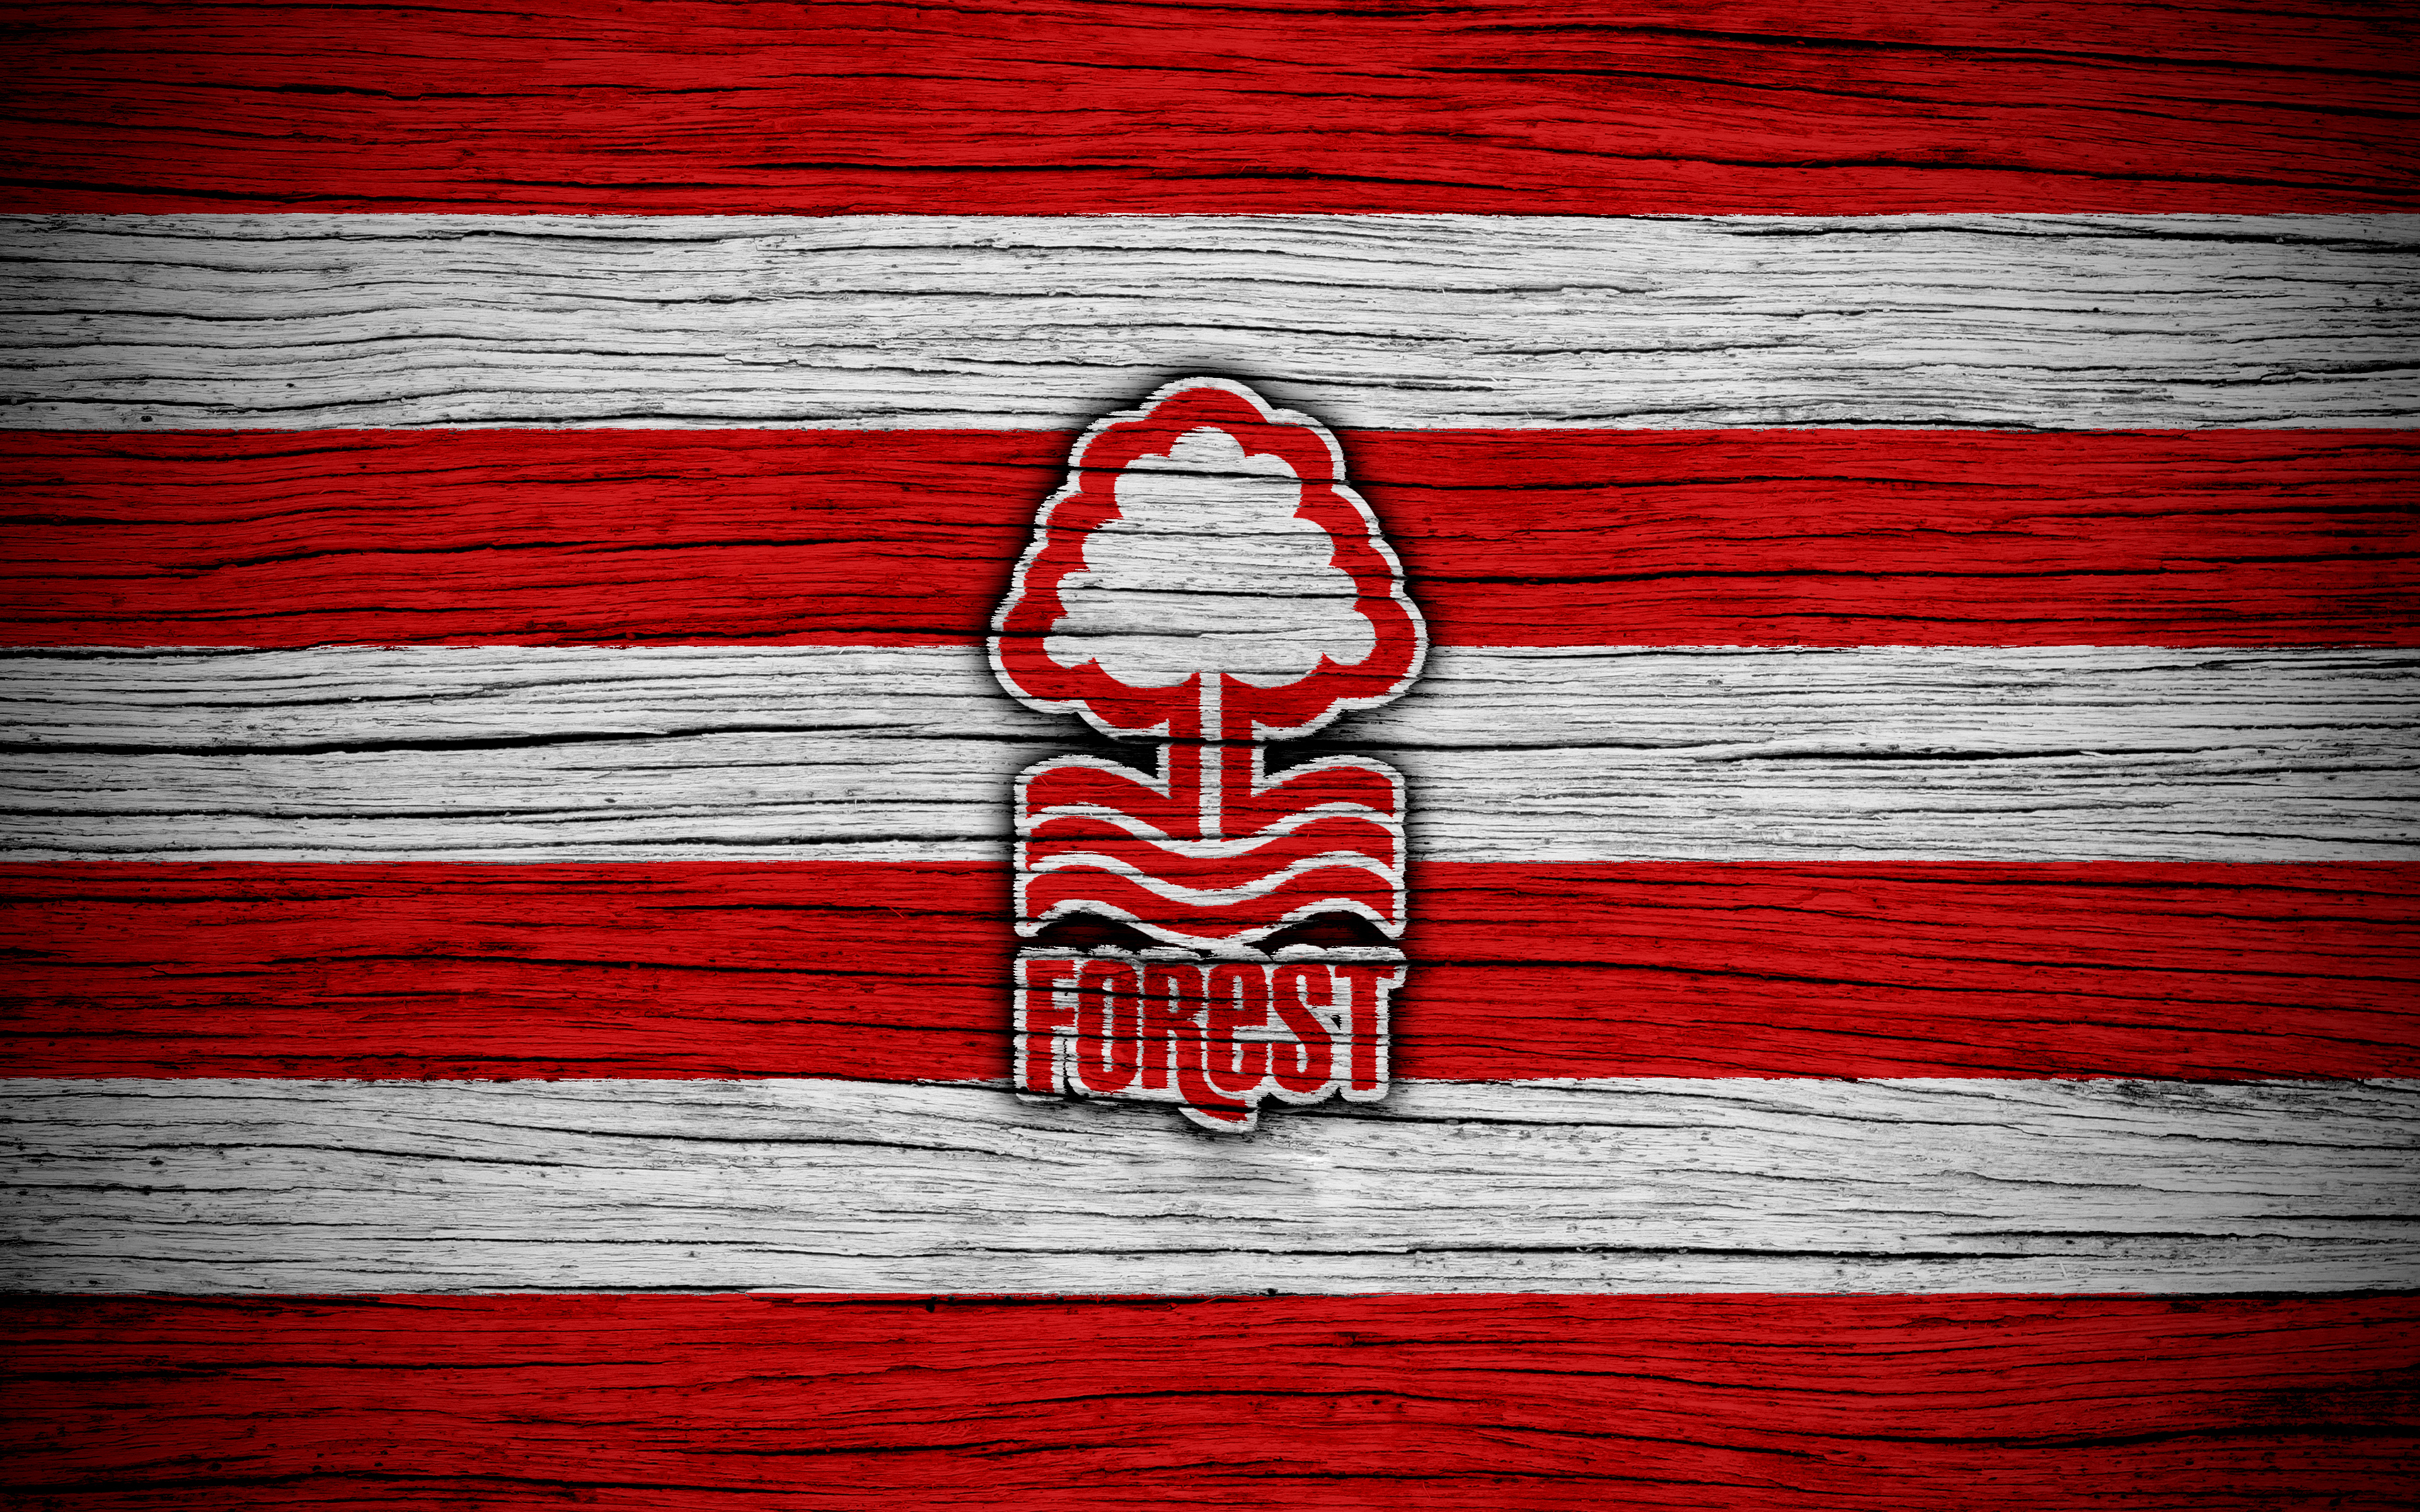 Nottingham Forest F.C. Wallpapers